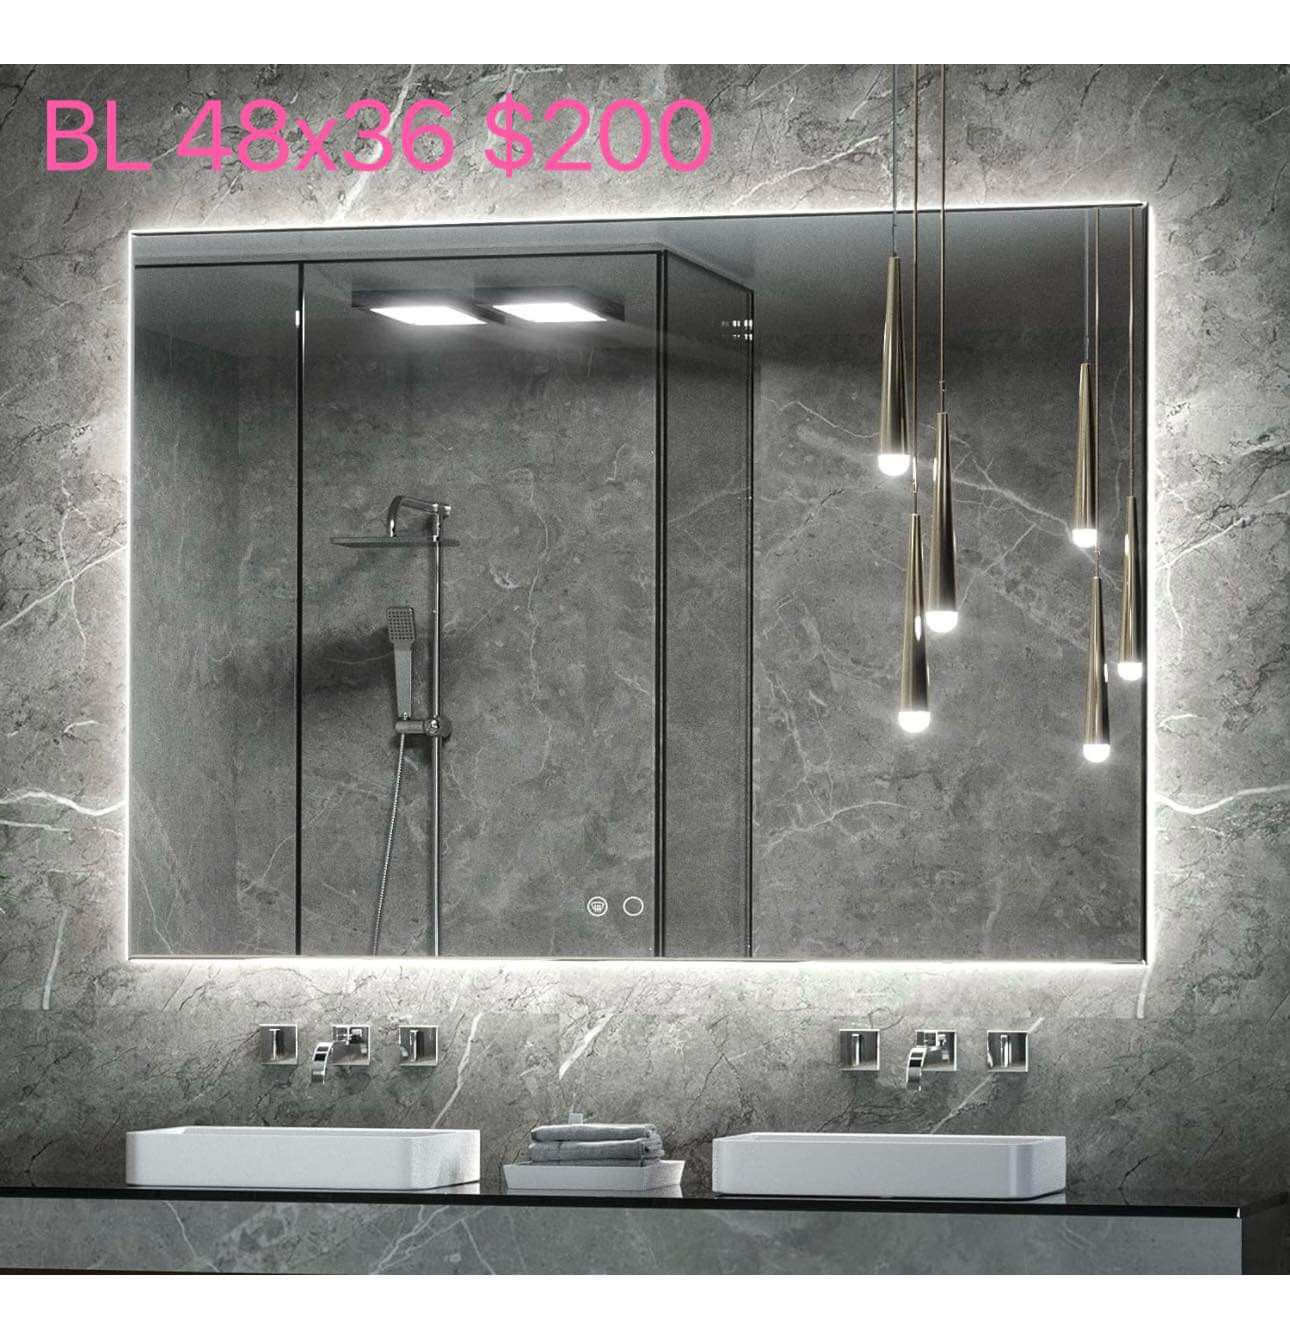 Keonjinn 48 x 36 Inch Backlit Mirror Bathroom LED Mirror Lighted Vanity Mirror Anti-Fog Wall Mounted Bathroom Mirror with Lights Large Dimmable Makeup